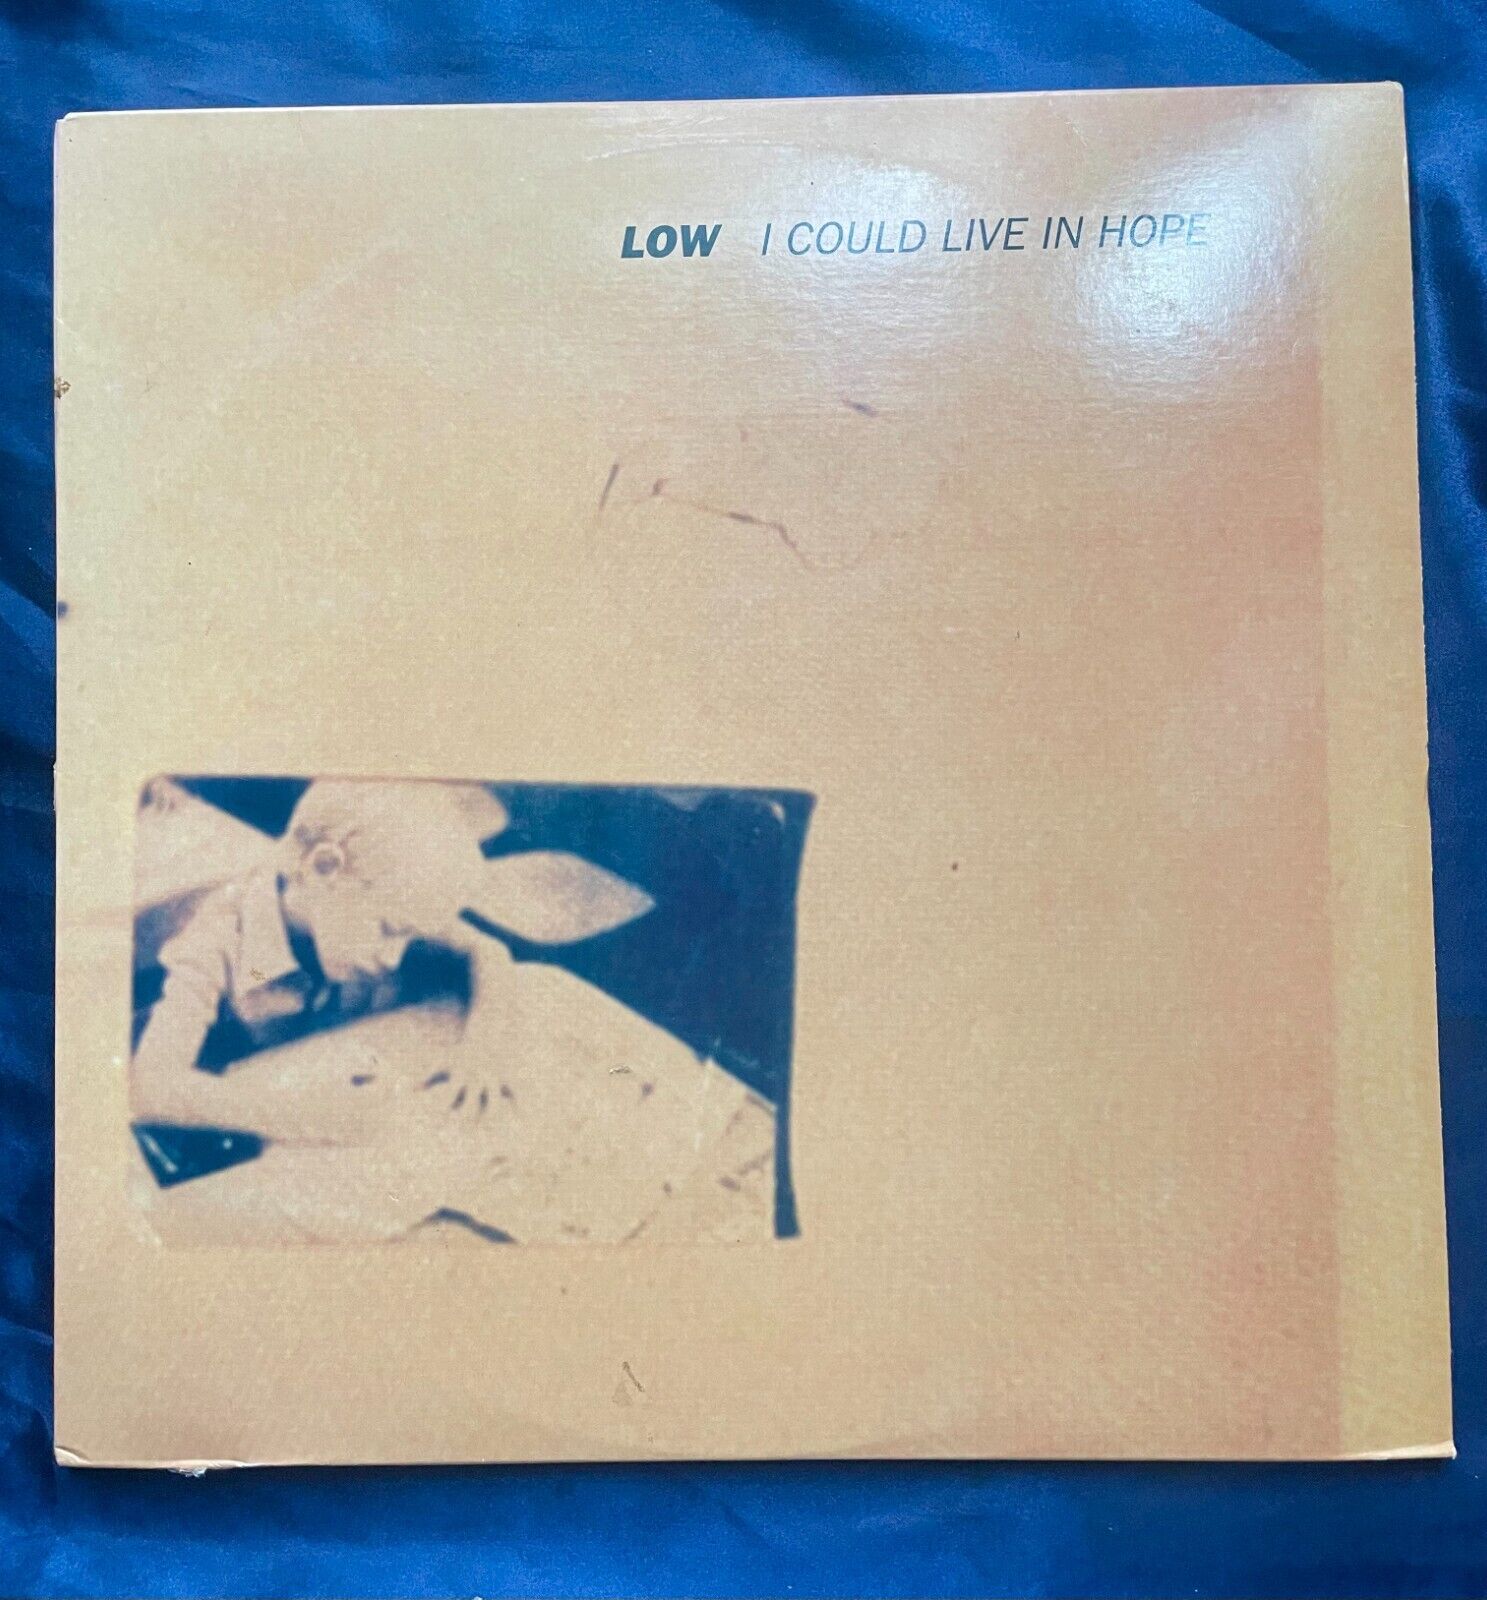 Low - I Could Live in Hope Double Vinyl LP rare and sough after